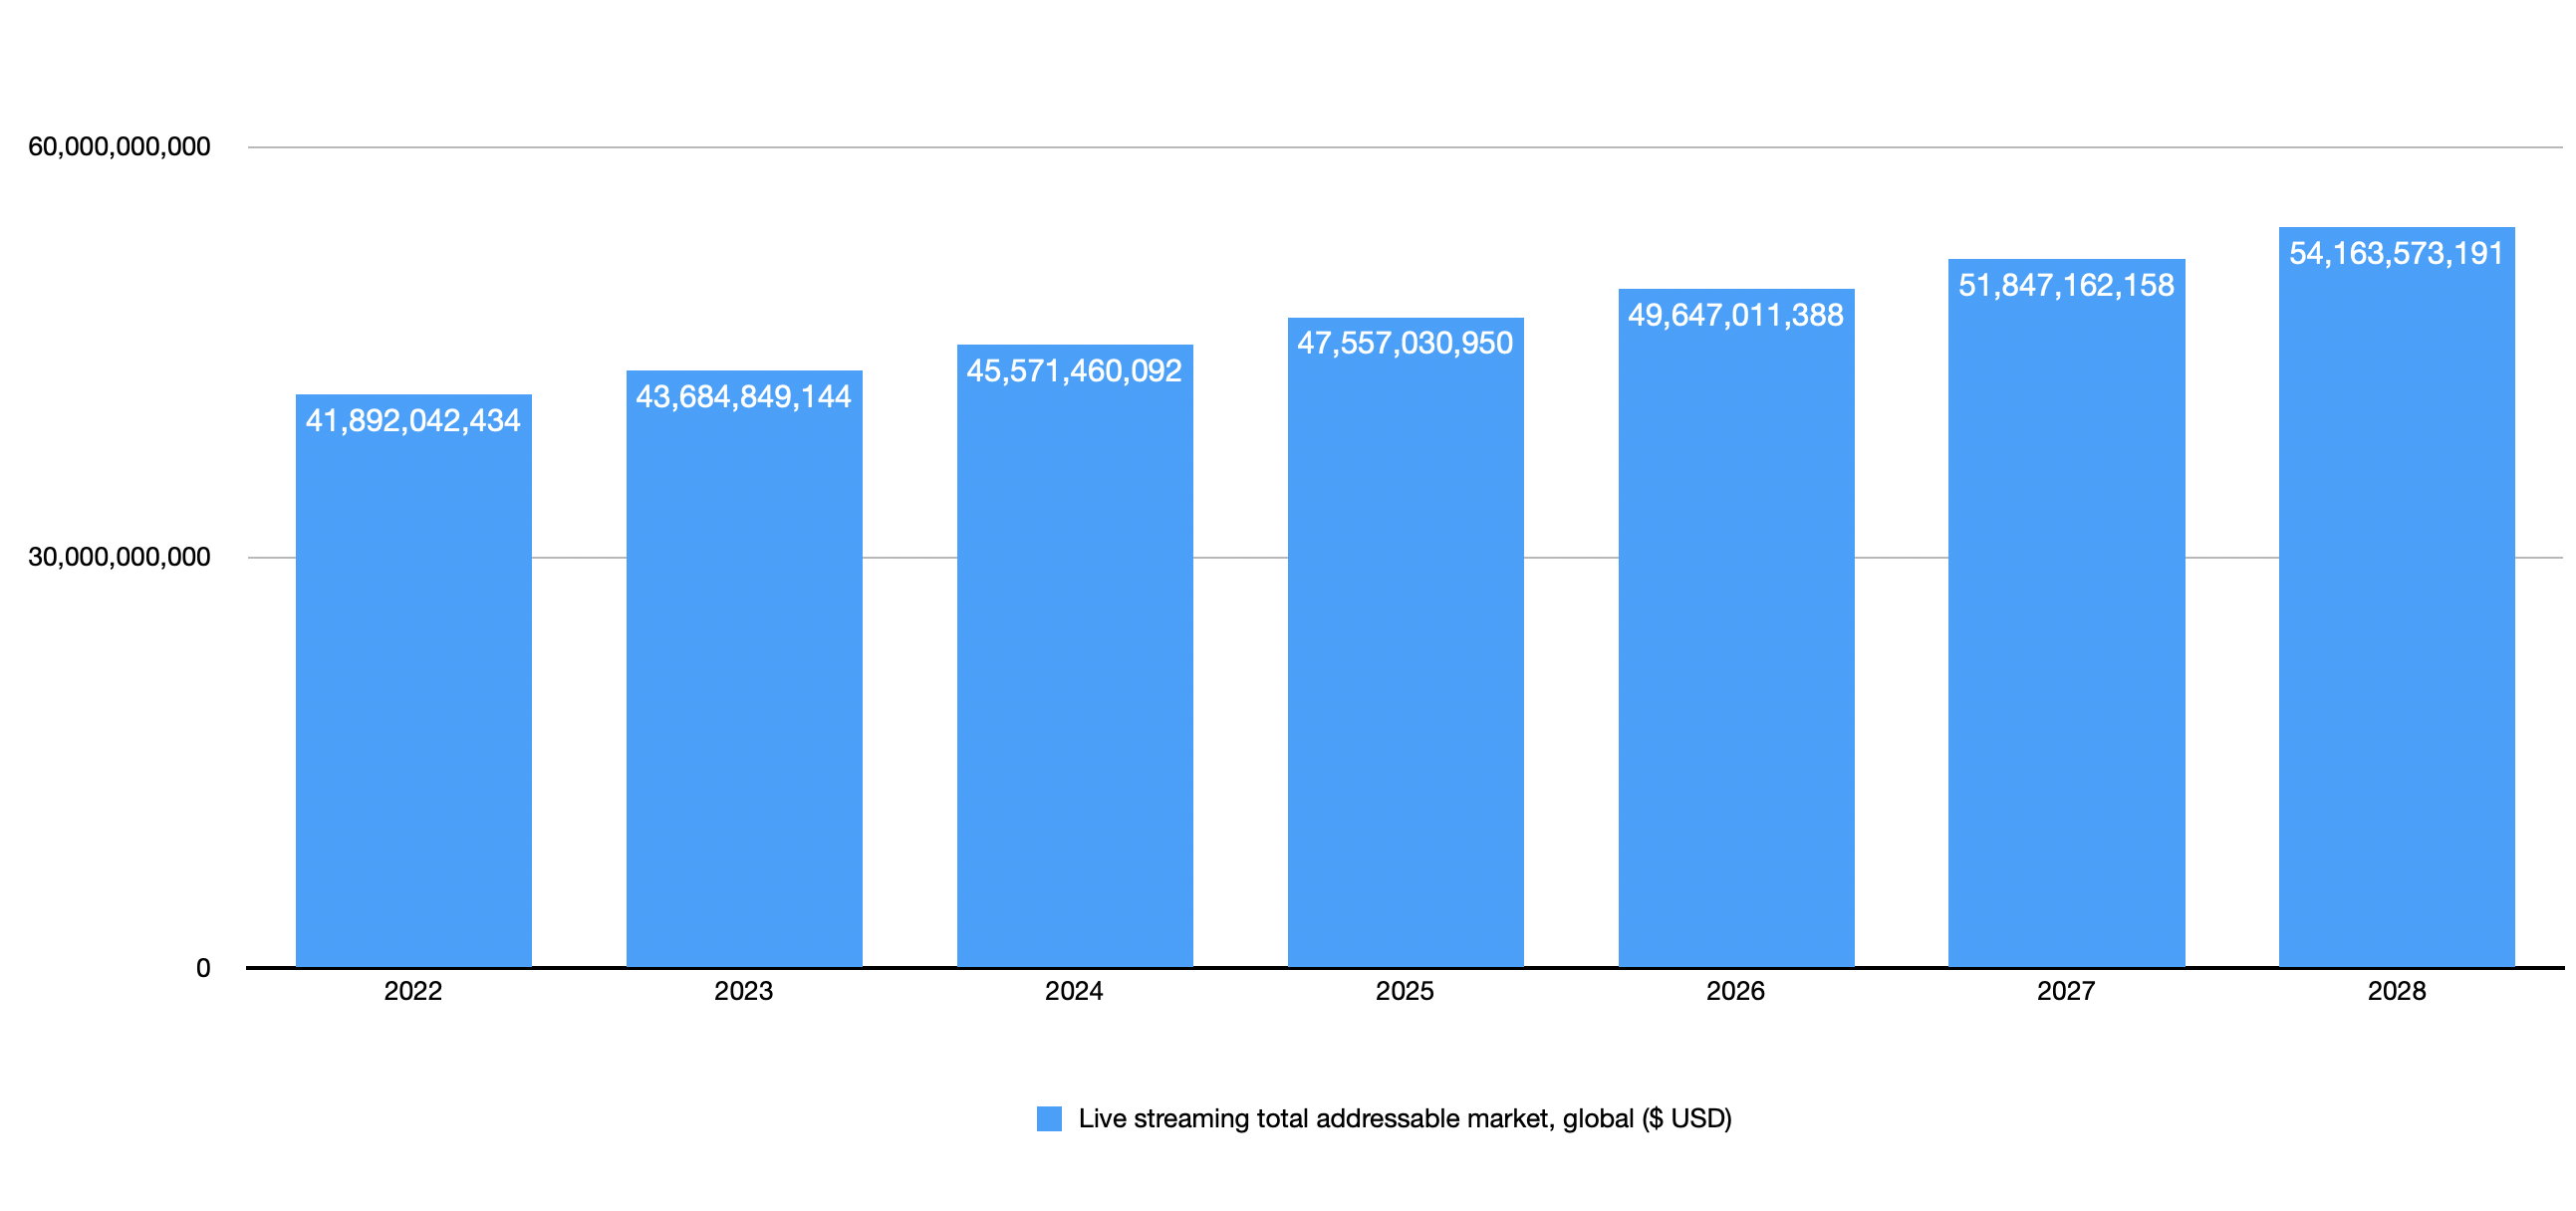 Chart showing the growth in the total addressable market for live streaming from 2022 to 2028.